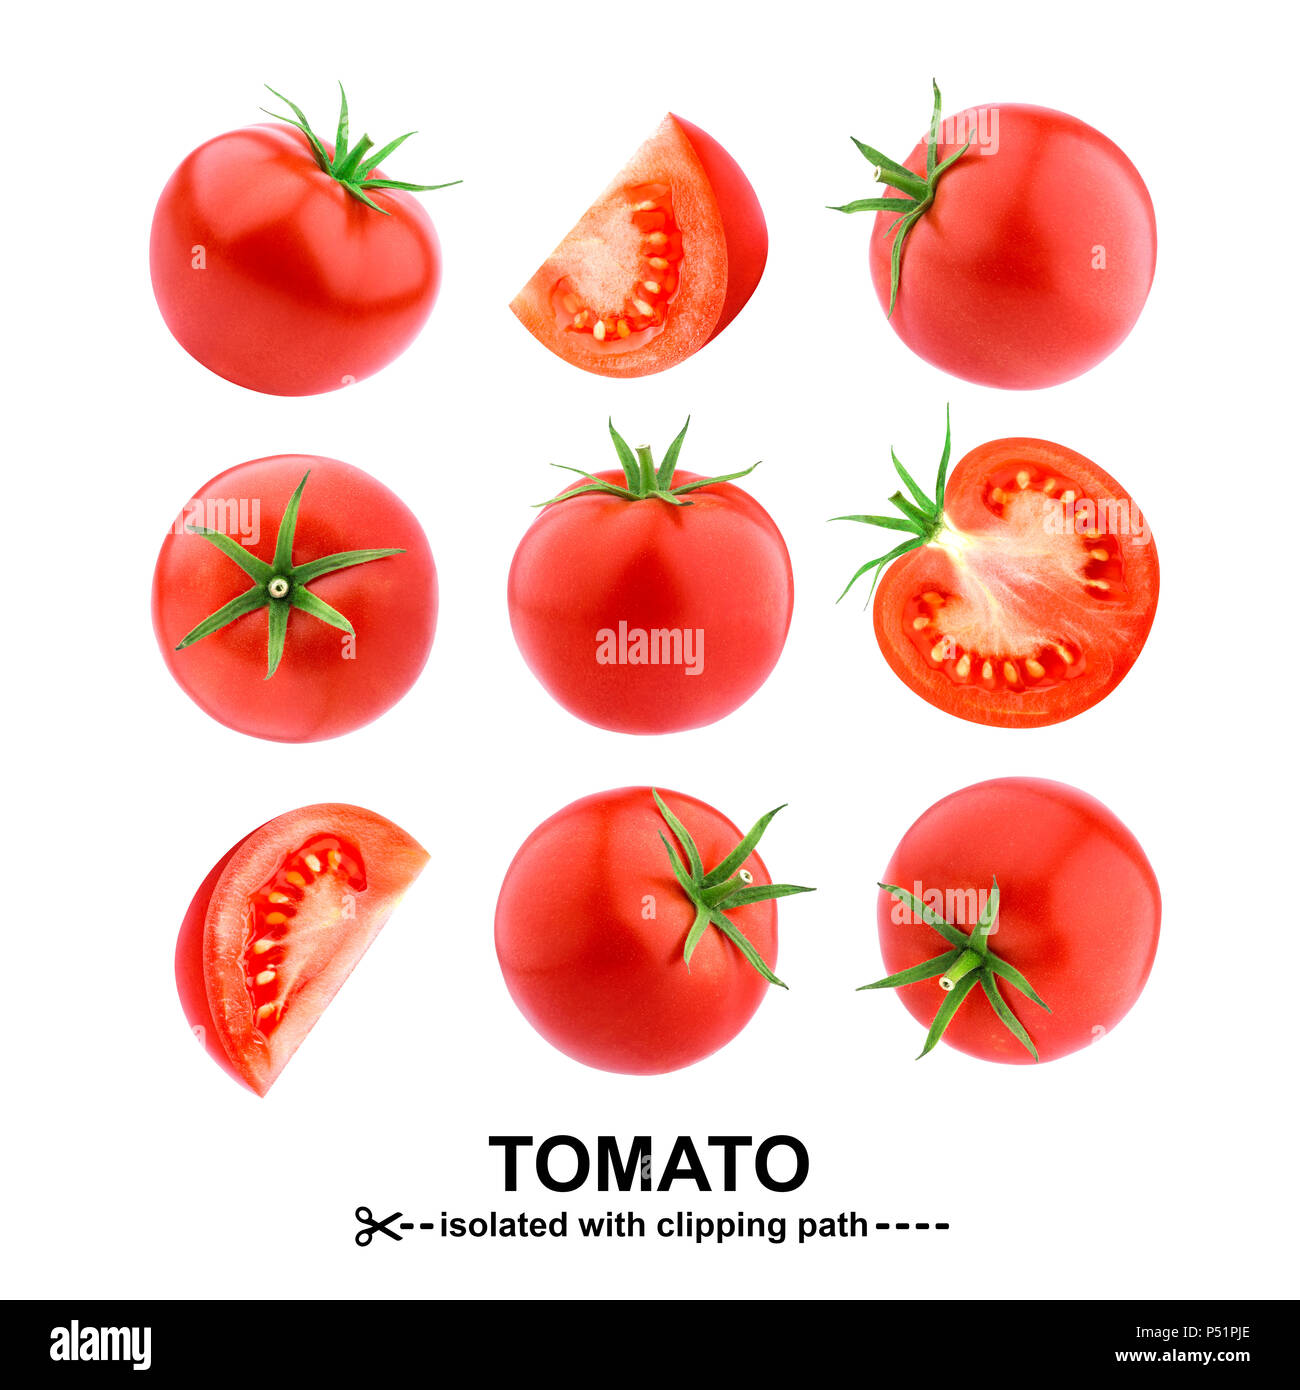 Tomatoes isolated on white background with clipping path. Collection Stock Photo